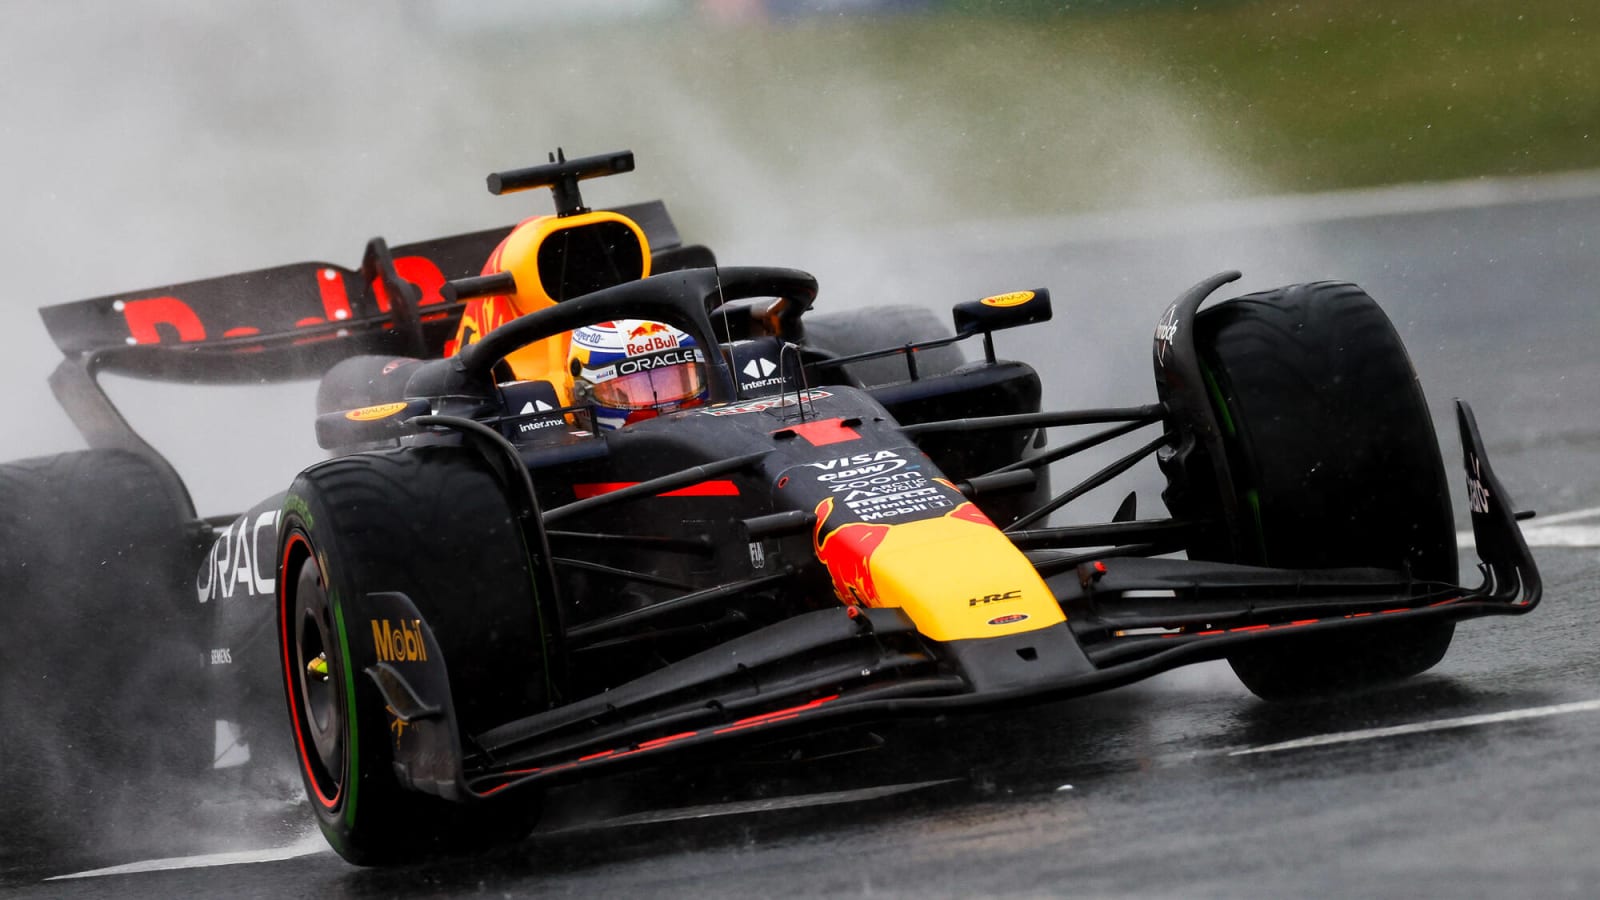 'It was like driving on thin ICE,' Max Verstappen blames slippery conditions for disappointing P4 finish in Shanghai Sprint Qualifying 